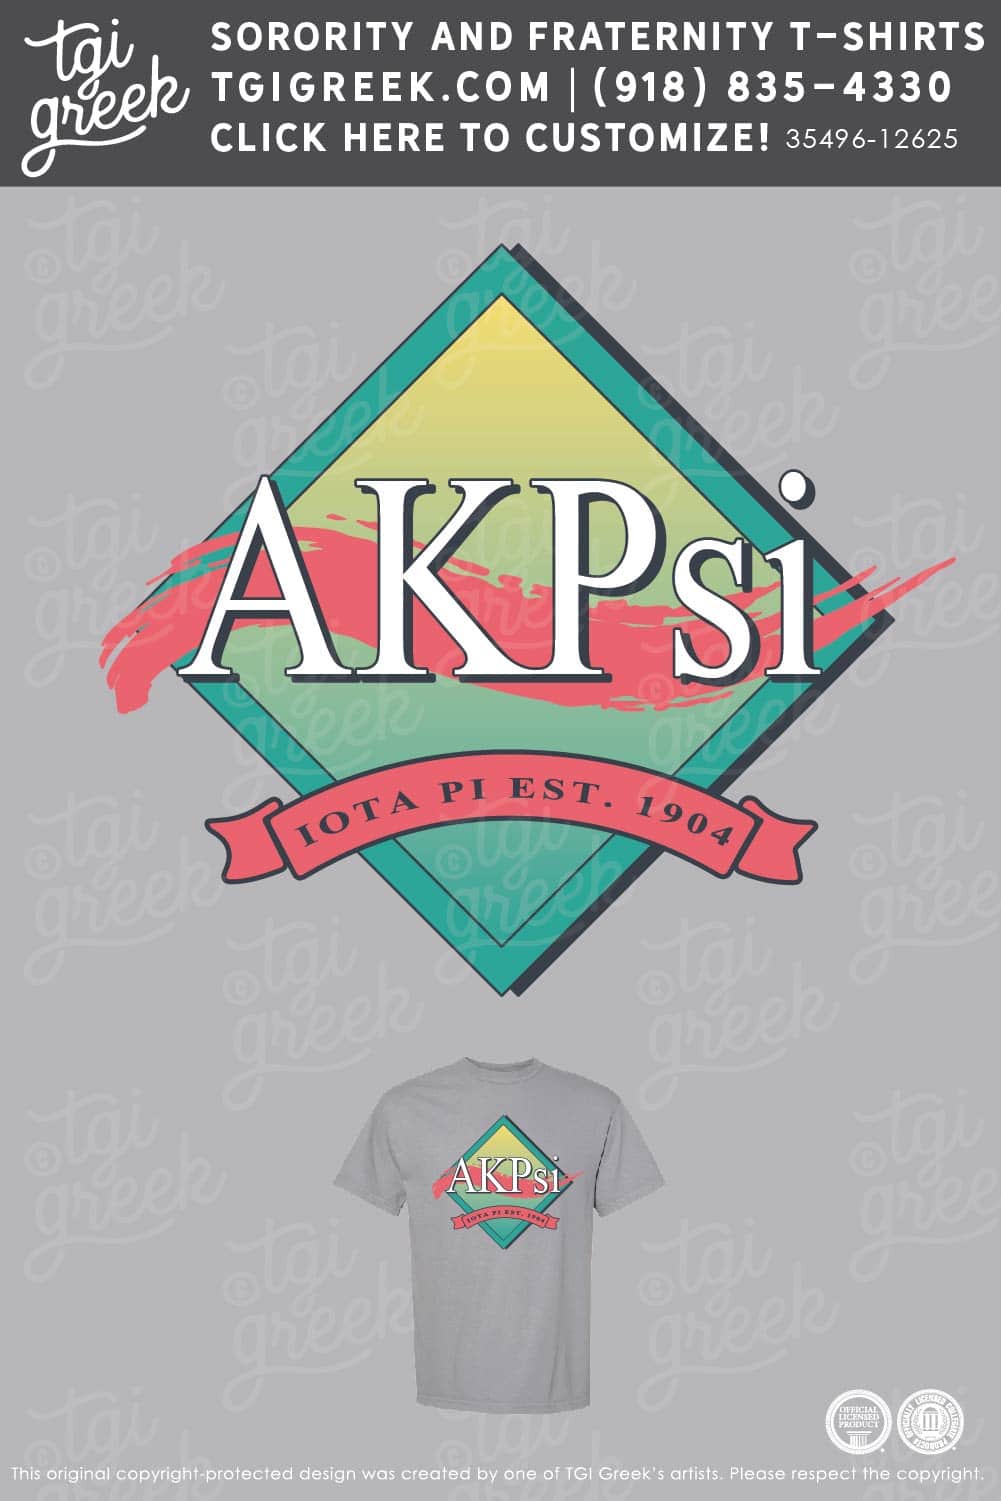 Alpha Kappa Psi Officially Licensed Merchandise